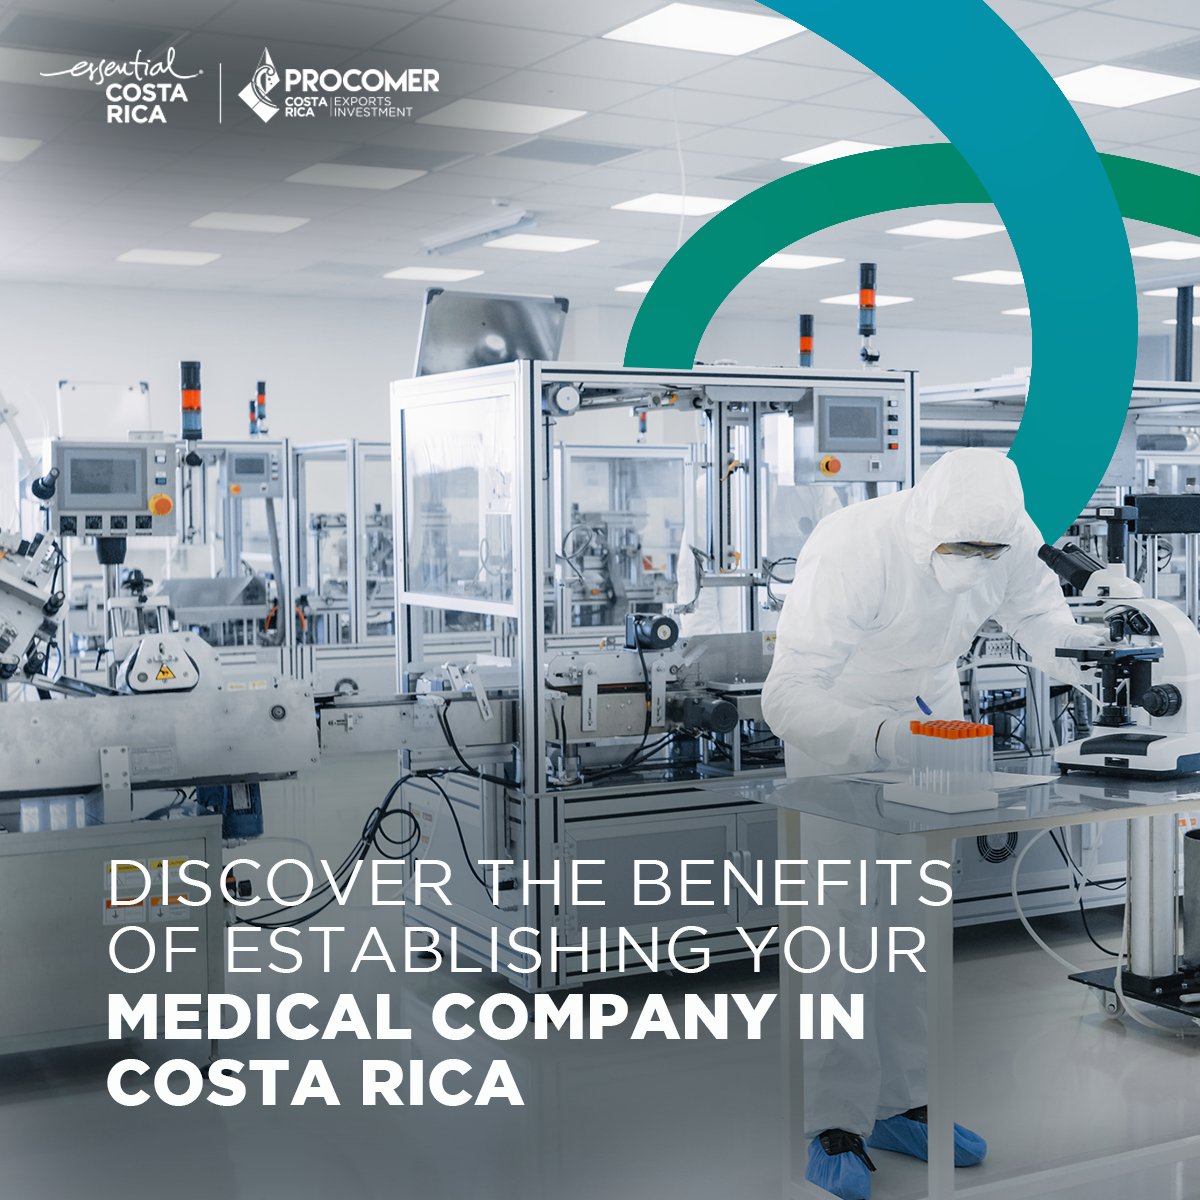 Costa Rica has been a hub for medical device manufacturing and high-value-added services for global leaders over the past three decades. Join us in this success story! More info: investincr.com/en/key-sectors/